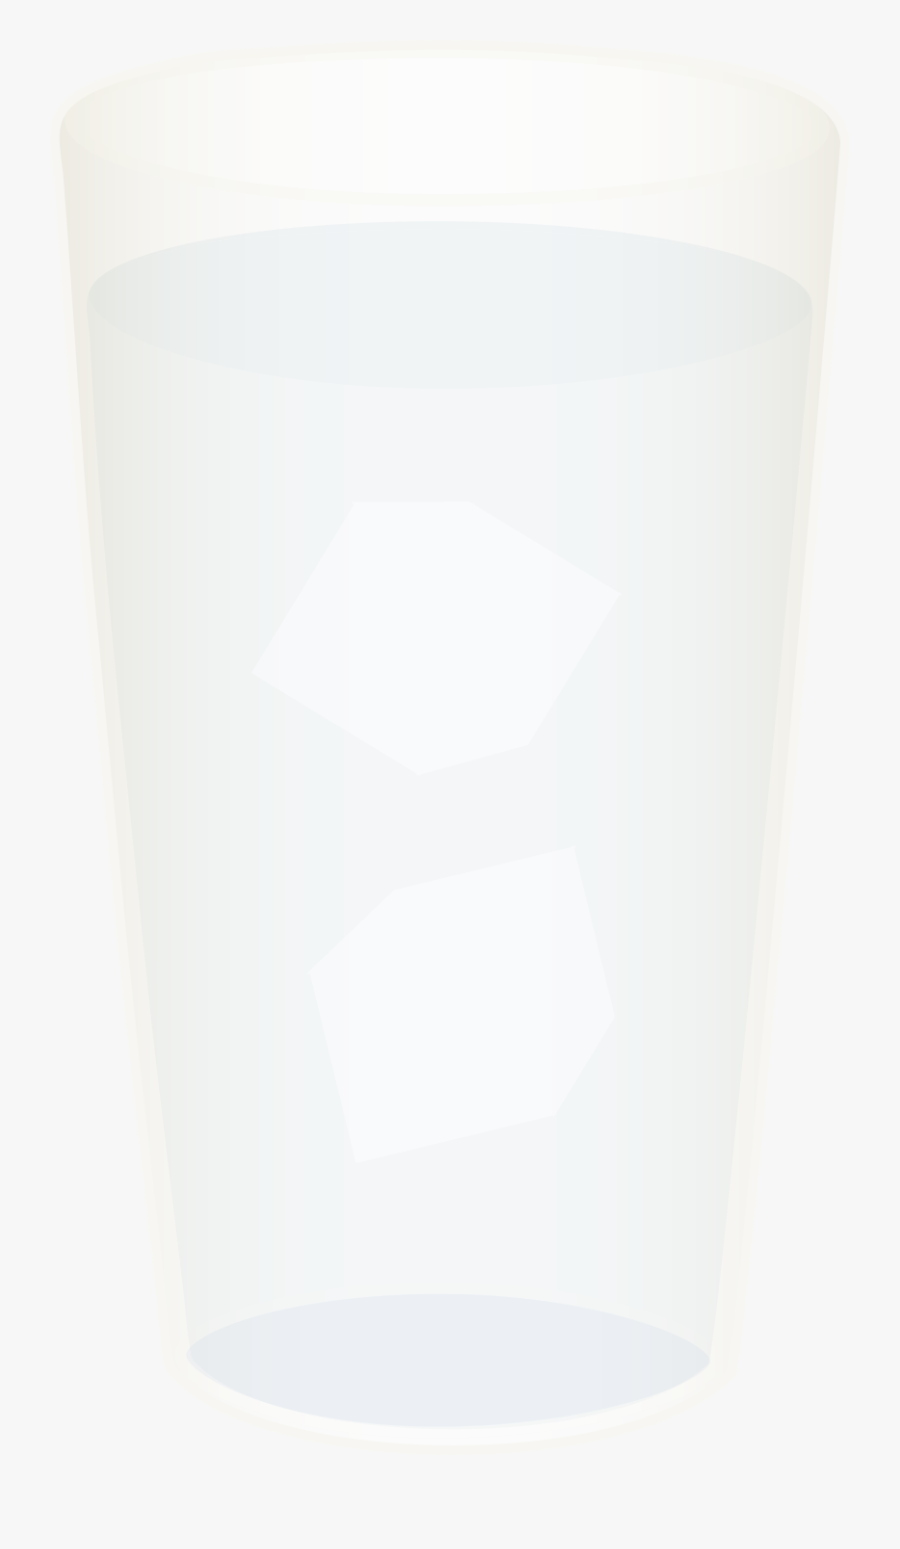 Glass Of Water With Ice Cubes Free Clip Art - Lampshade, Transparent Clipart